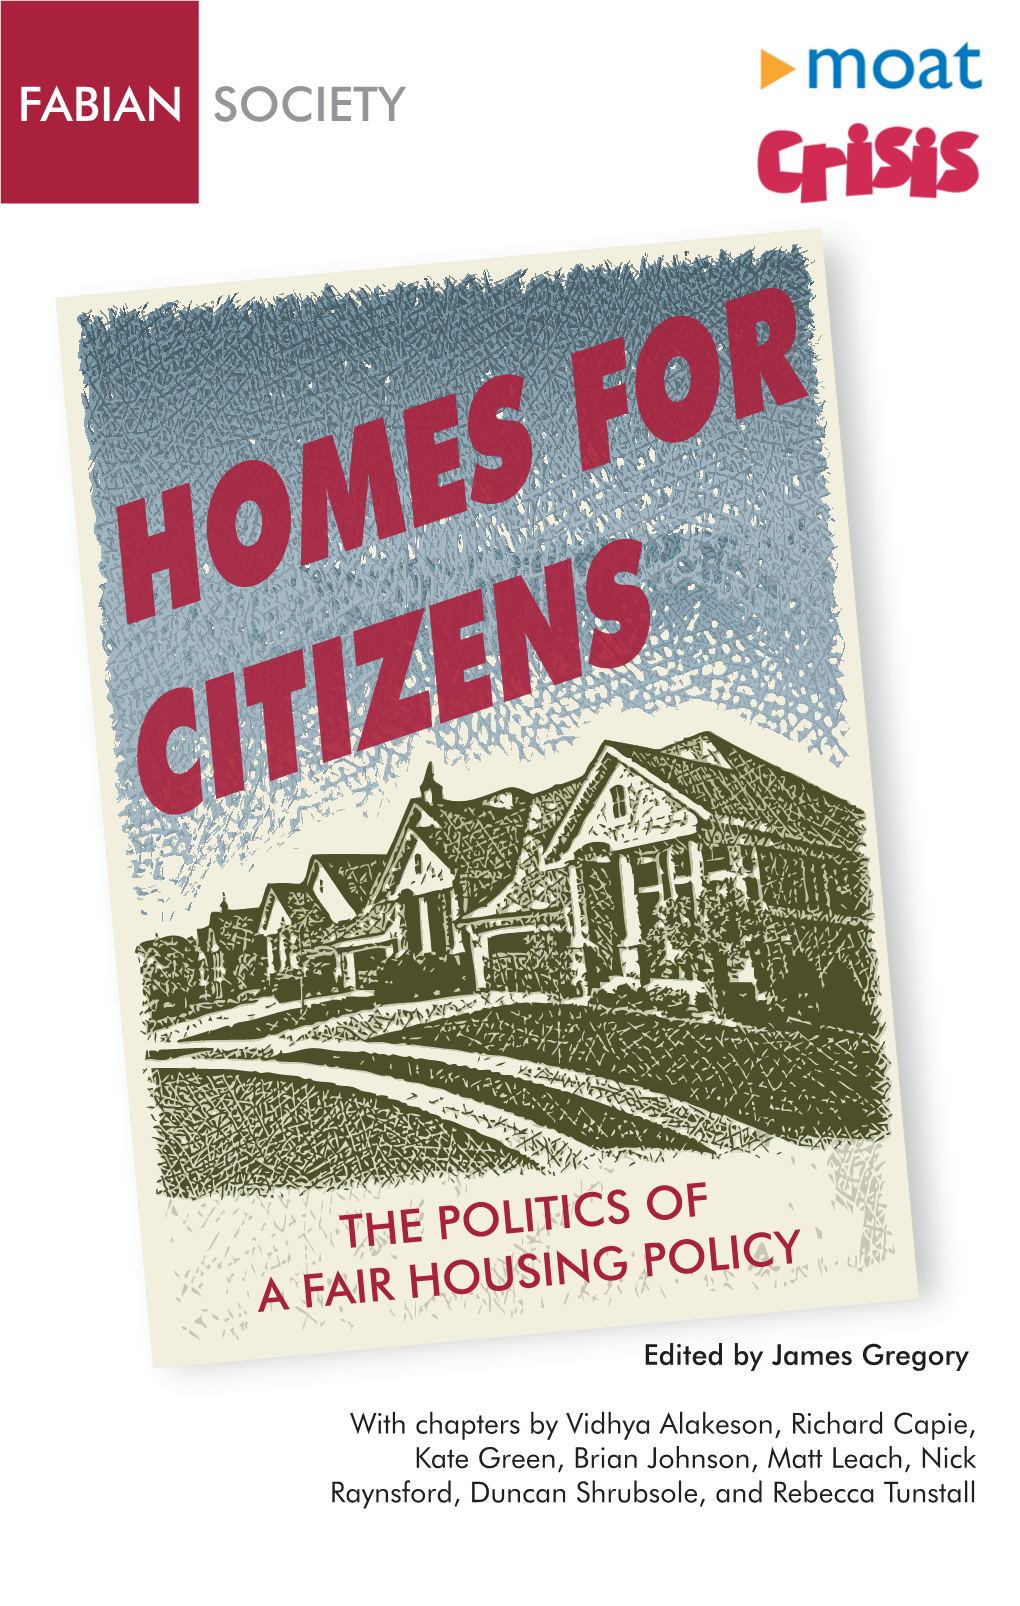 Homes for Citizens Front